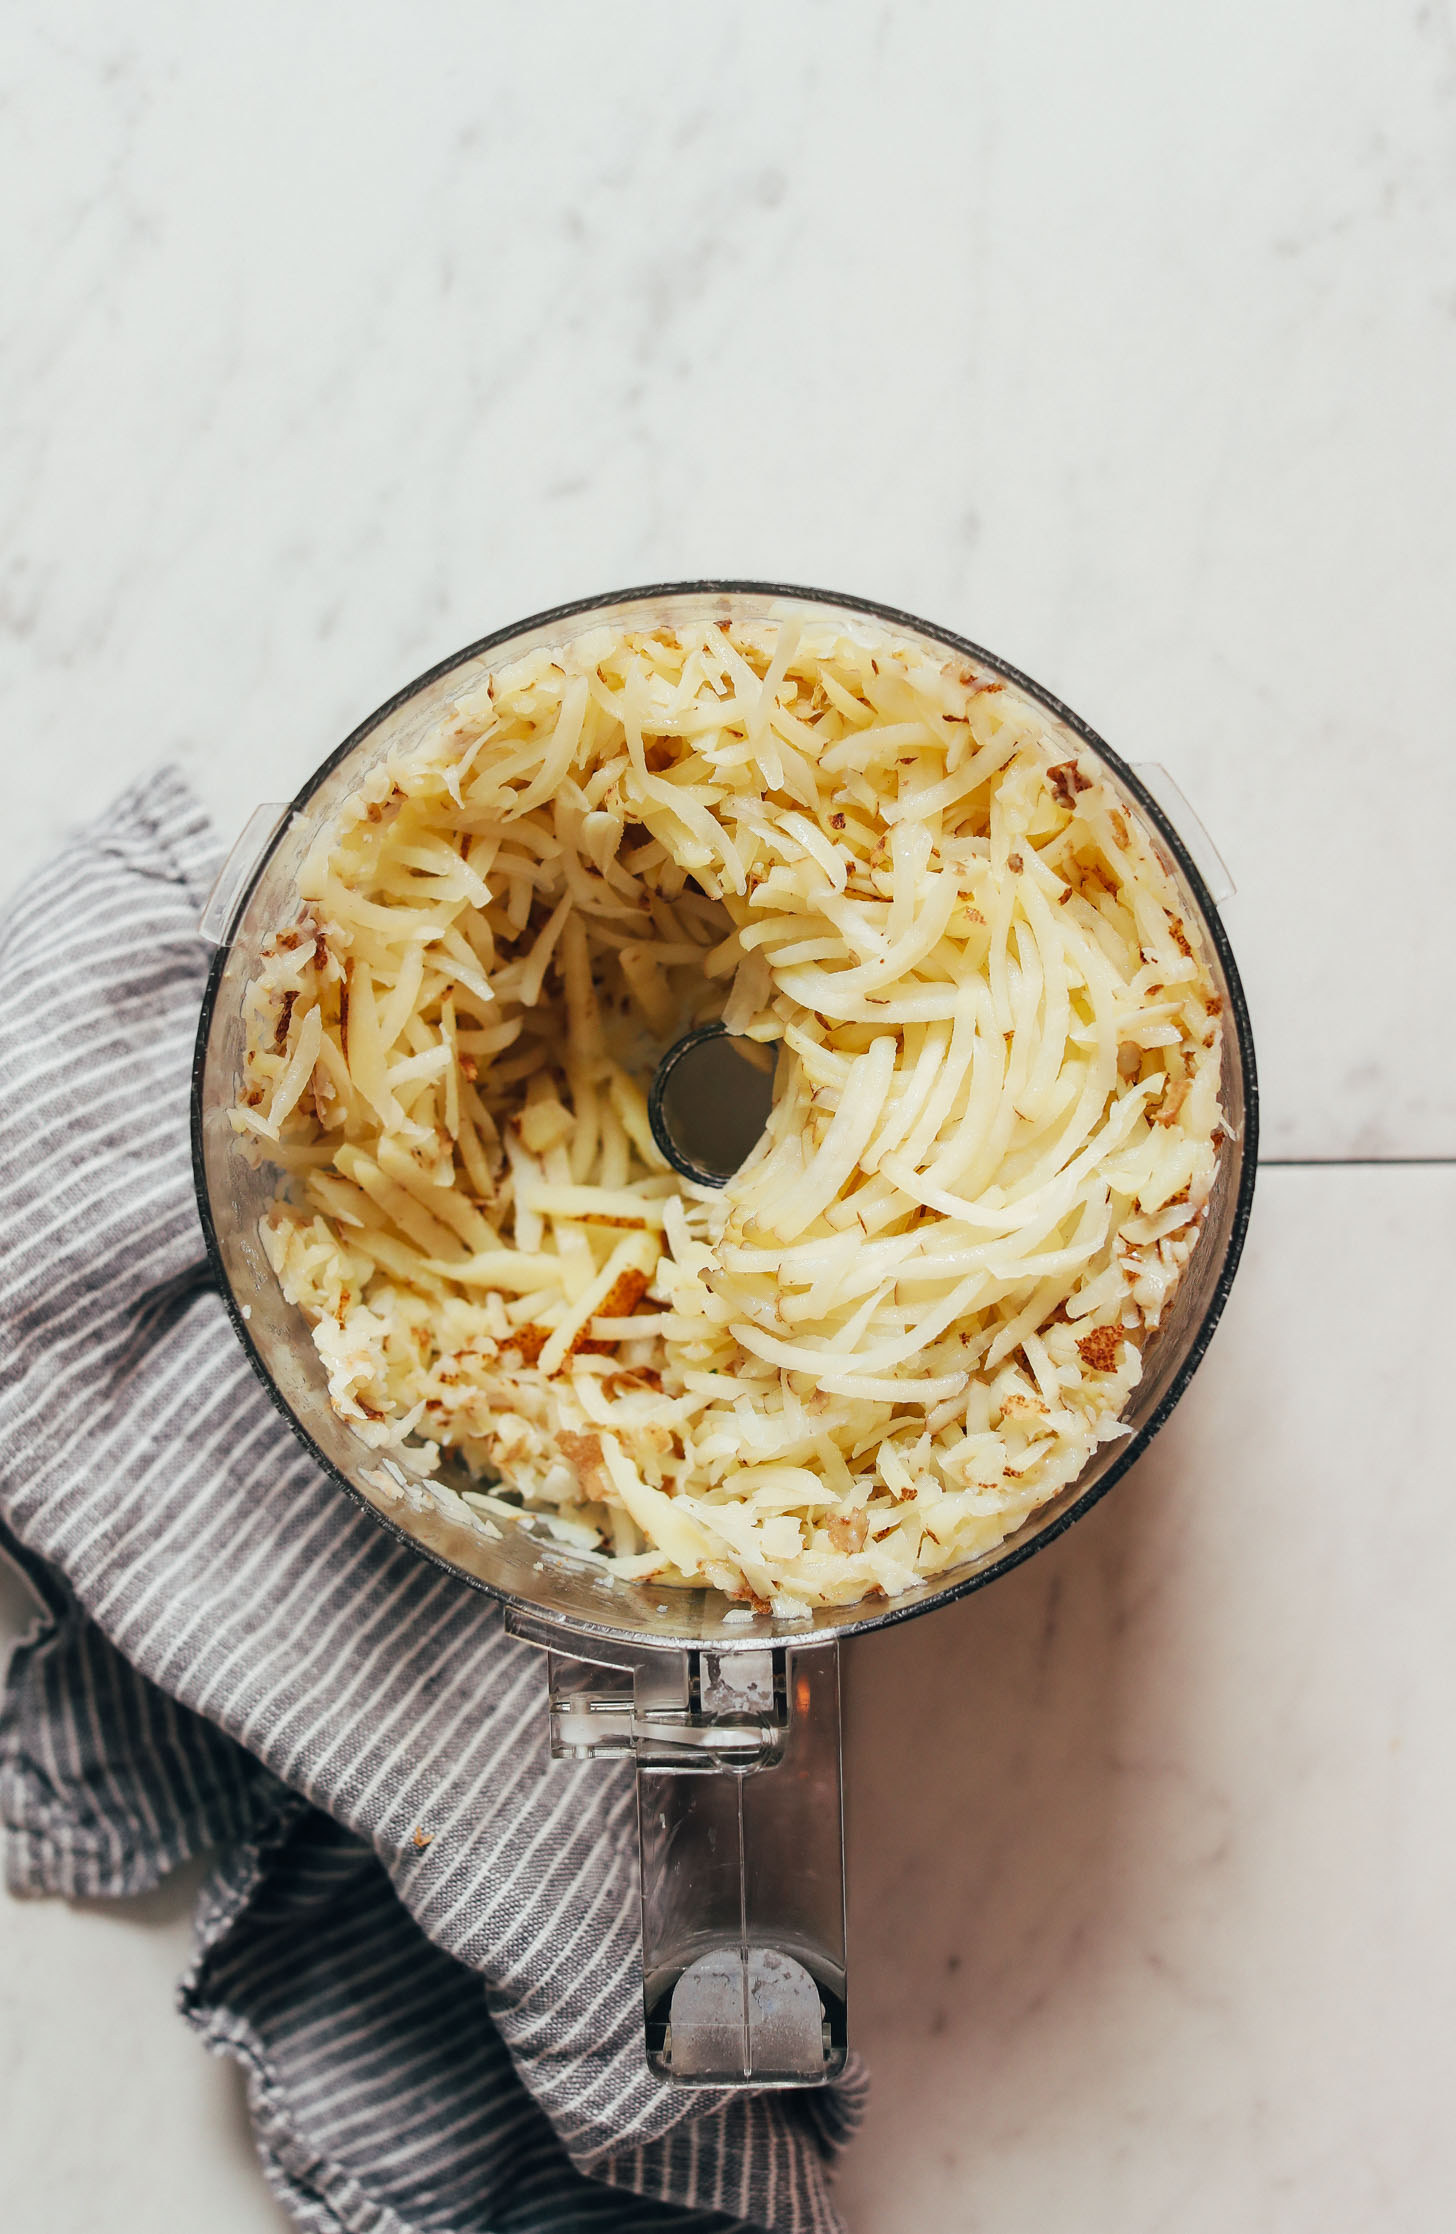 Par-cooked grated potatoes in a food processor